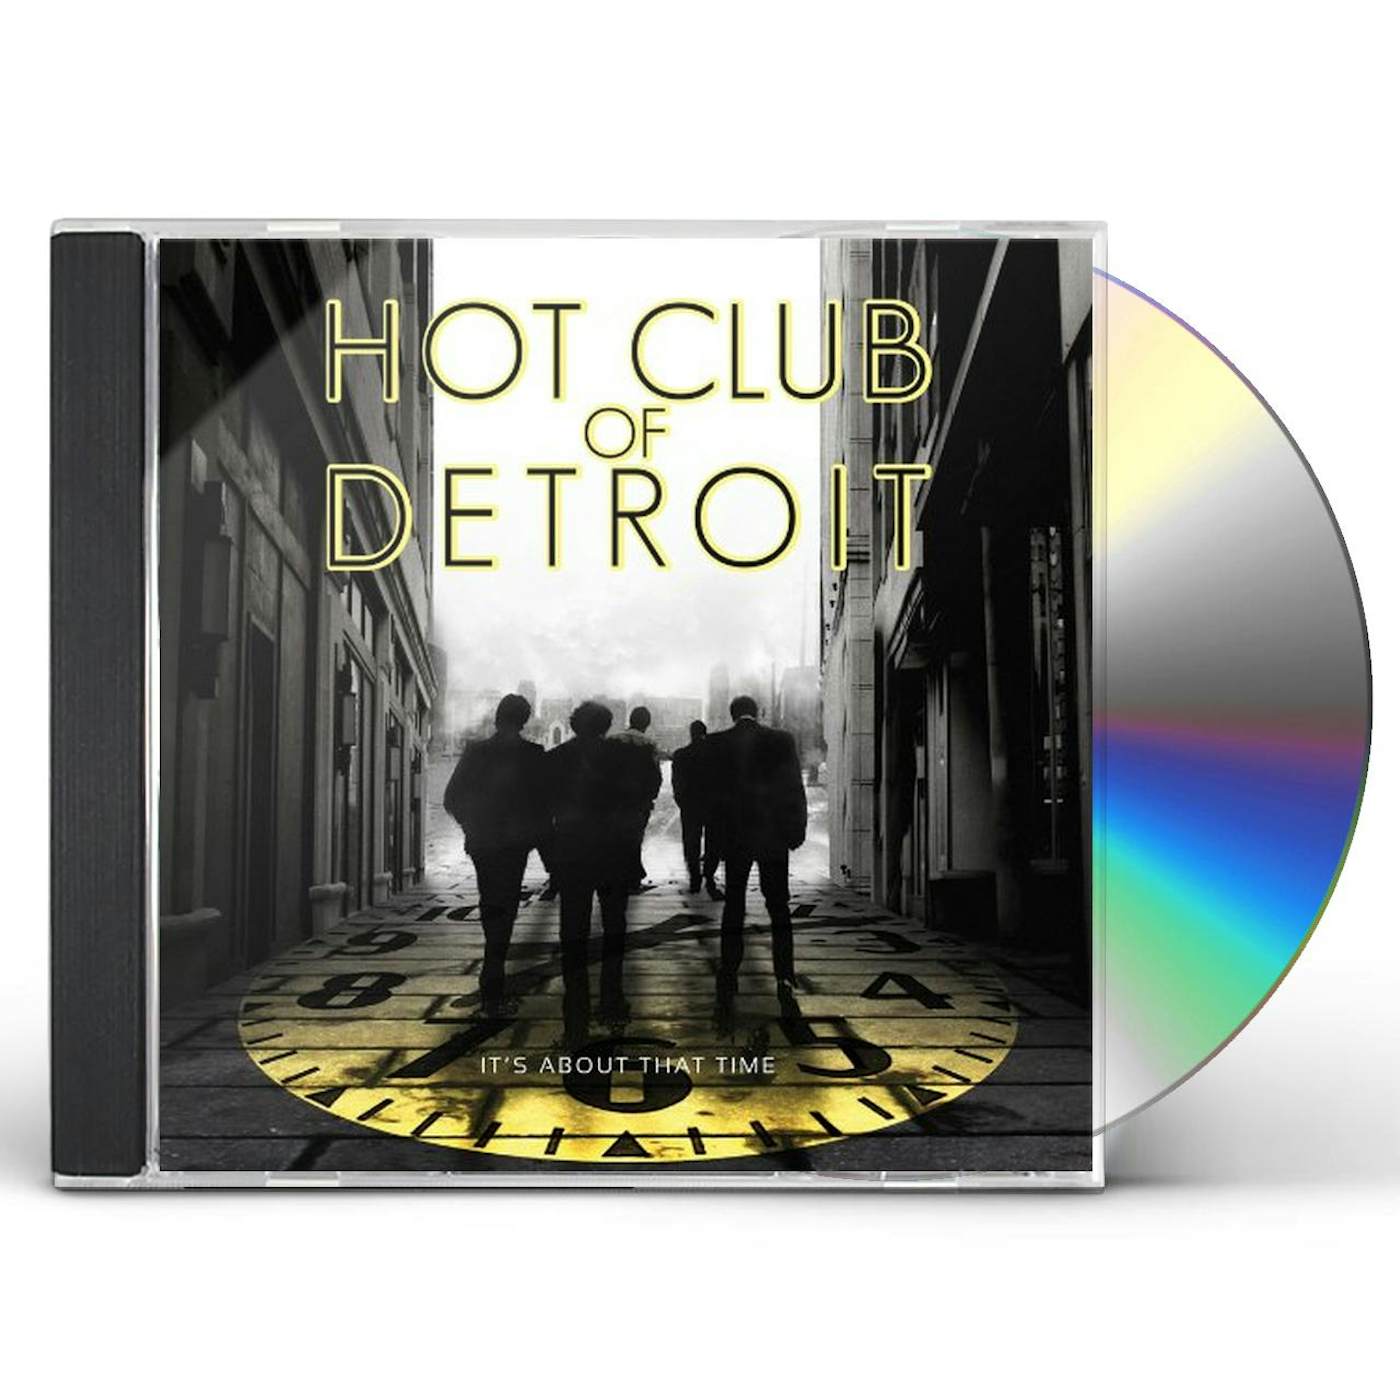 Hot Club of Detroit IT'S ABOUT THAT TIME CD